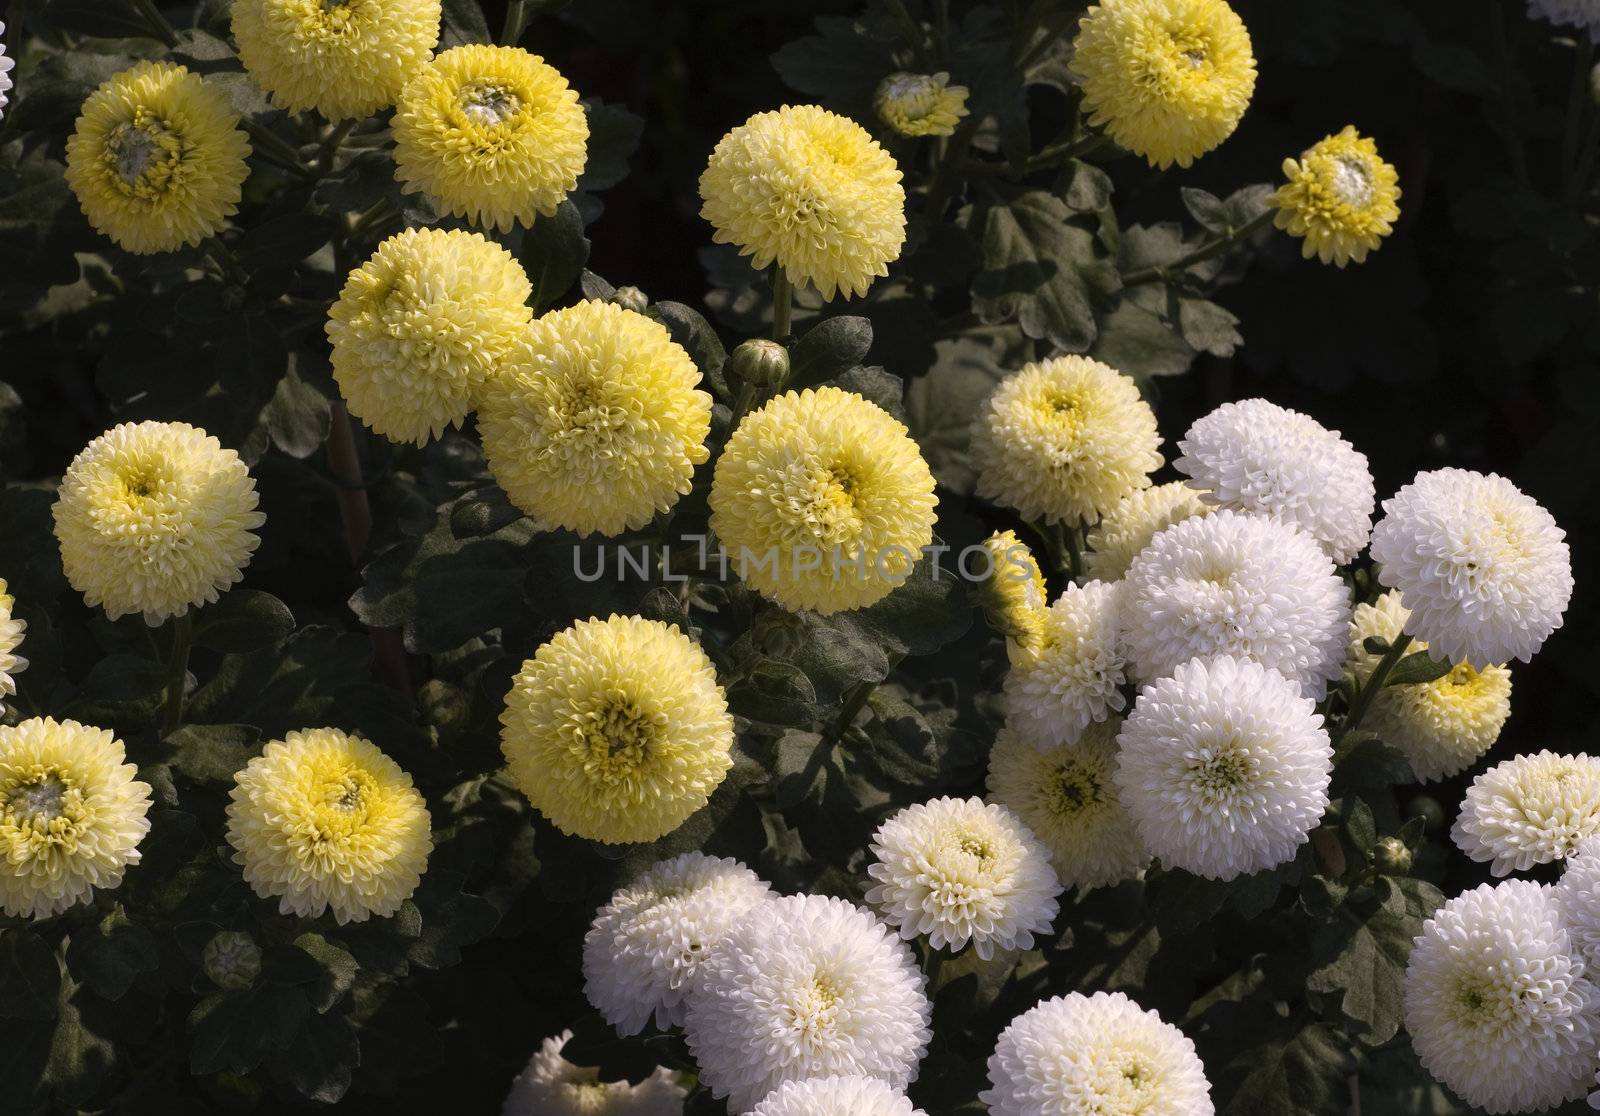 Two kind of chrysanthemum - yellow and white are both circle and lovely.